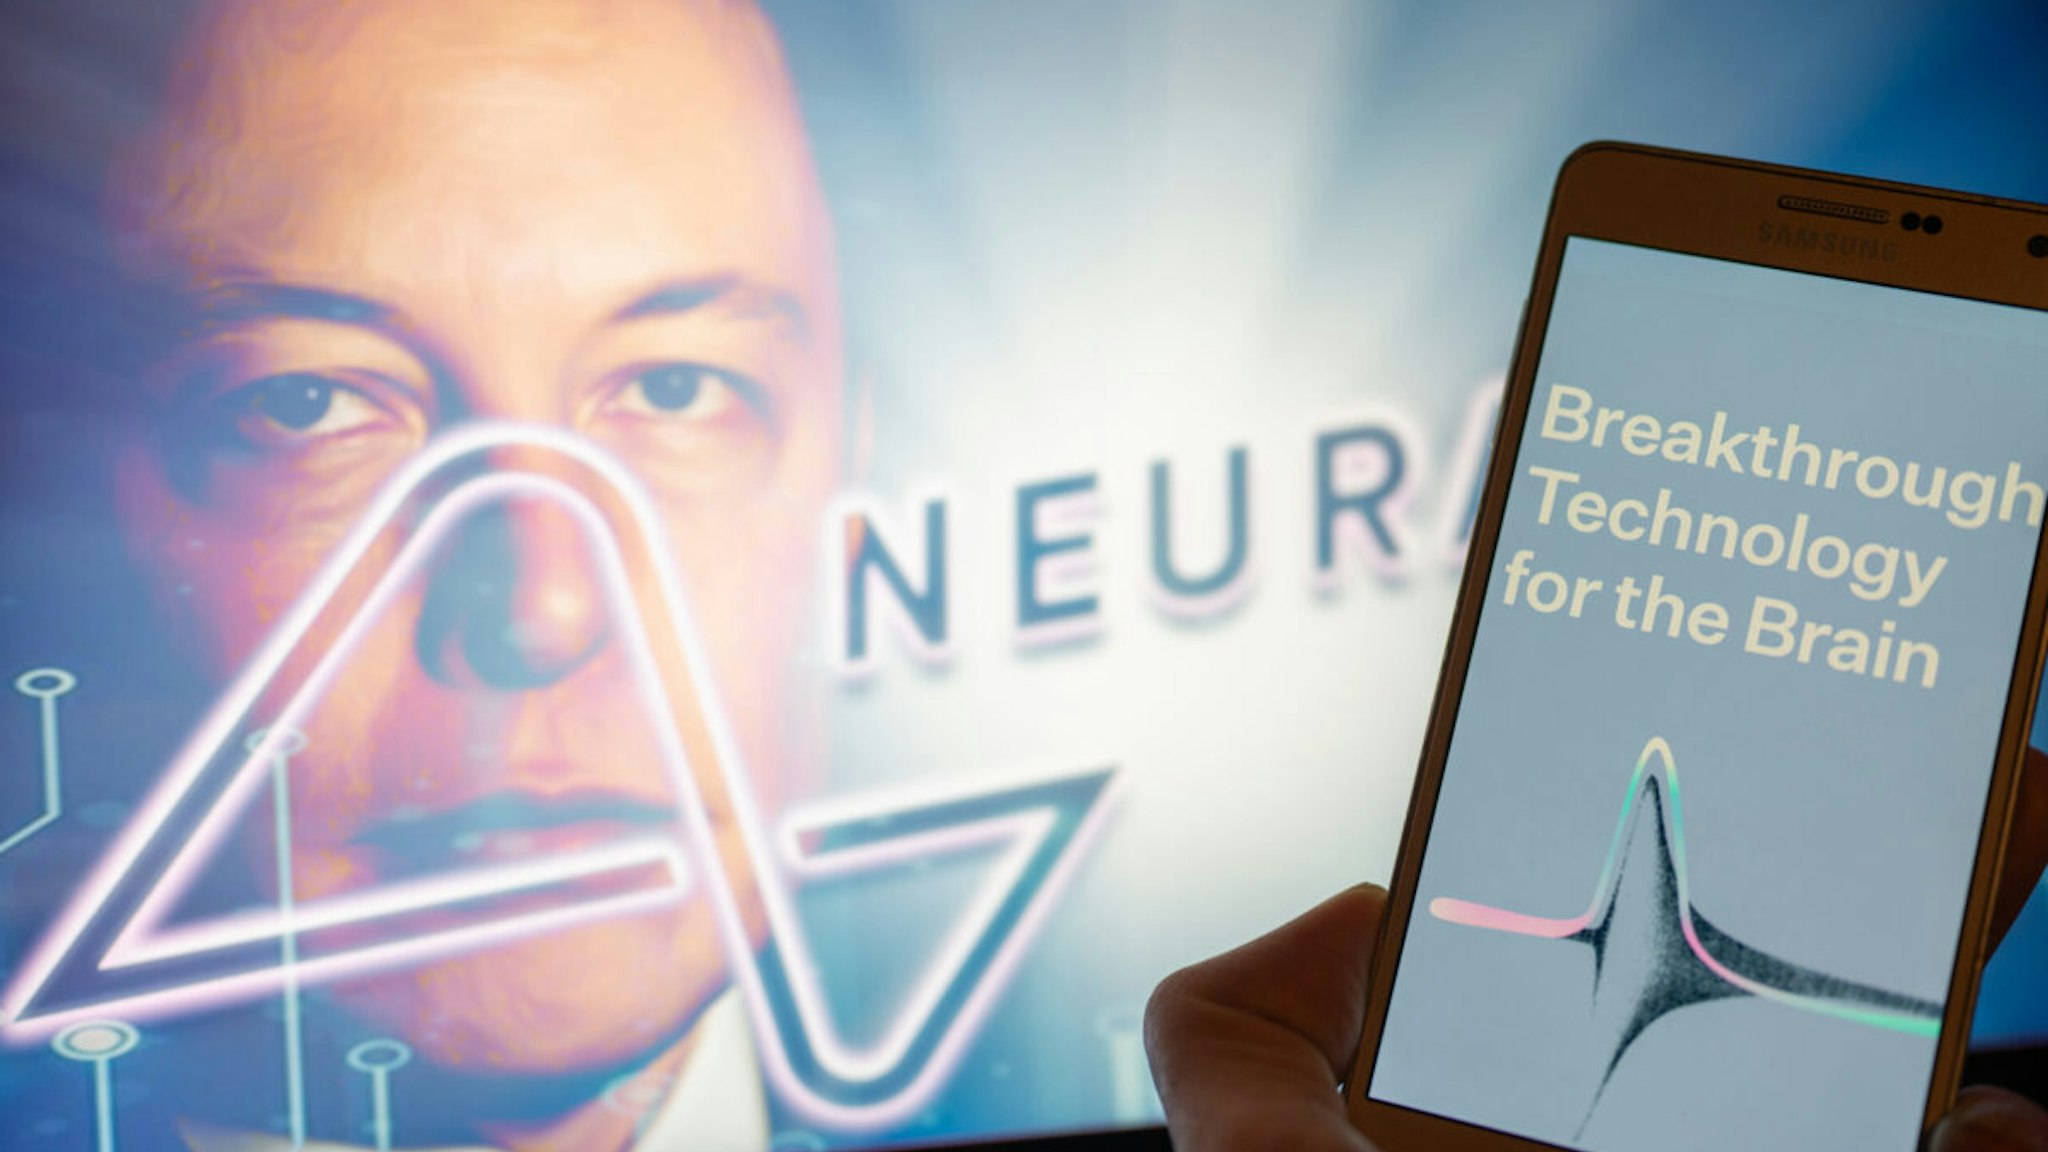 Neuralink logo displayed on mobil with founder Elon Musk seen on screen in the background. Neuralink Corporation is a neurotechnology company that develops implantable brain-computer interfaces. In Brussels on 4 December 2022.